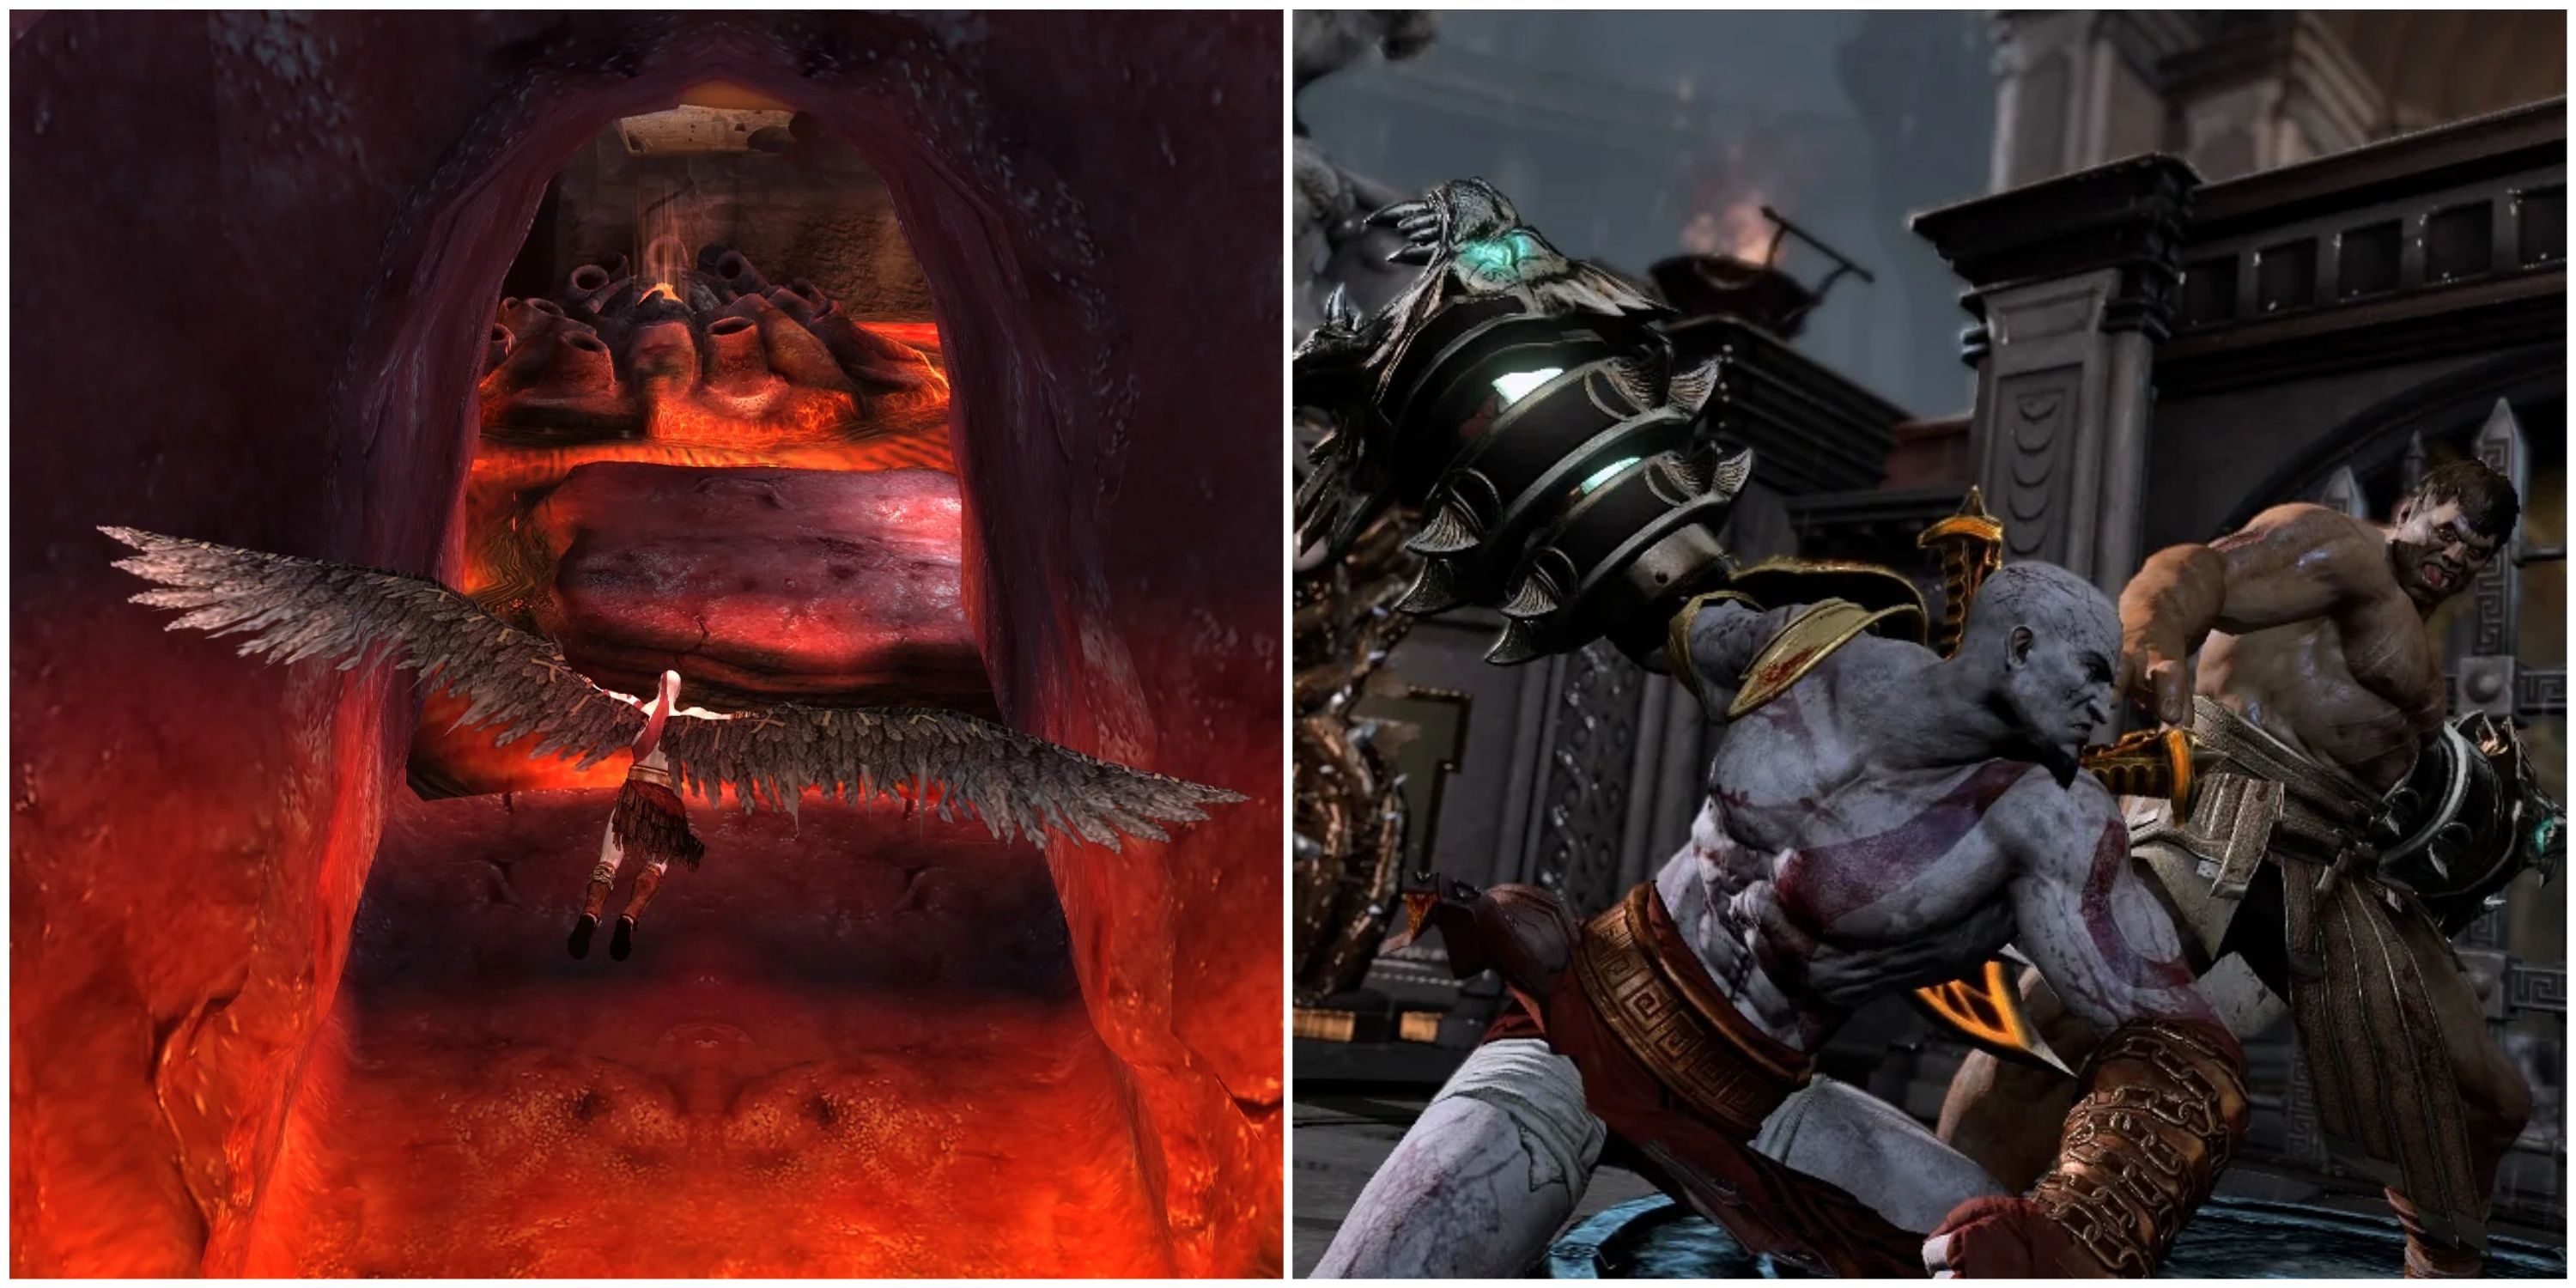 The wings of Icarus in God of War 2 and the Nemean Cestus in God of War 3